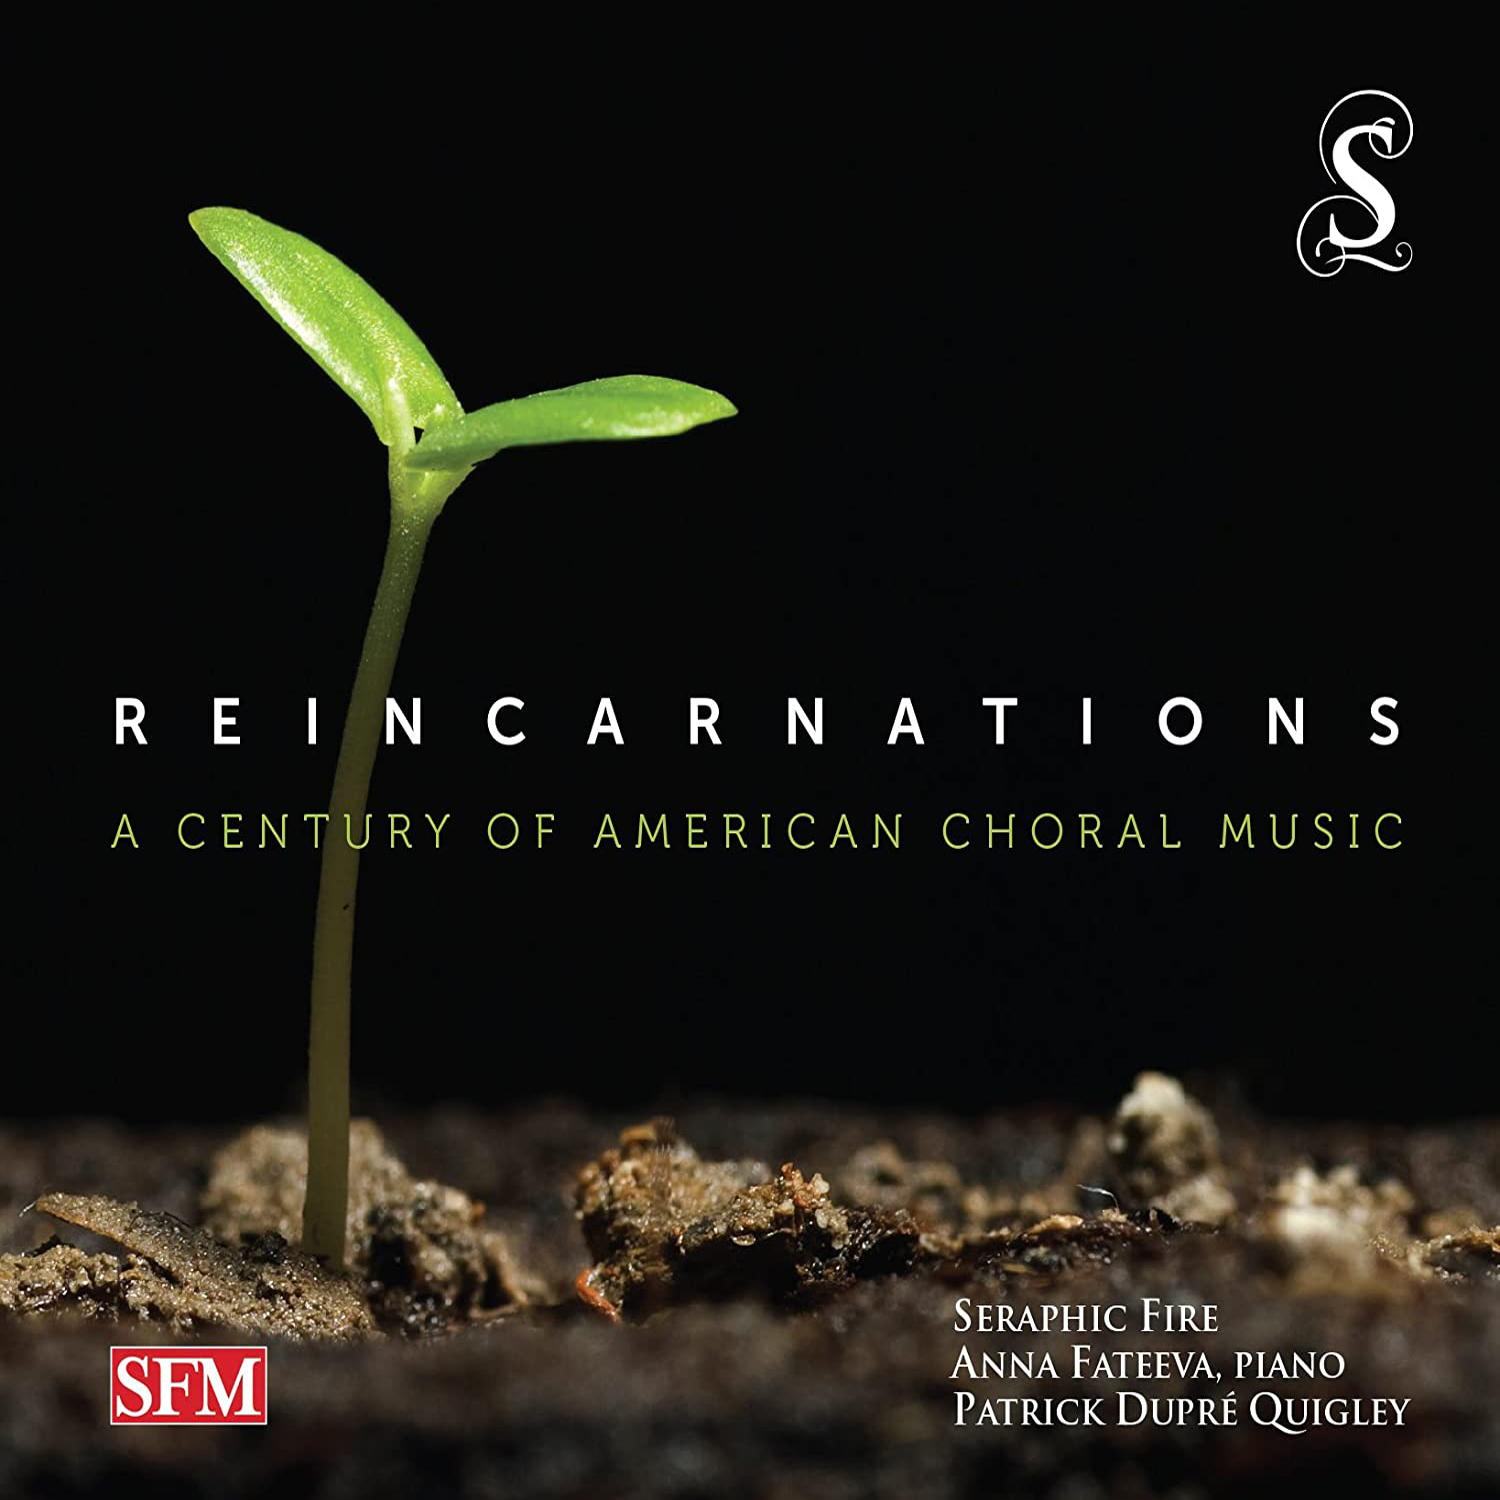 The Light of Common Day
Seraphic Fire, Reincarnations: A Century of American Choral Music, Seraphic Fire Media